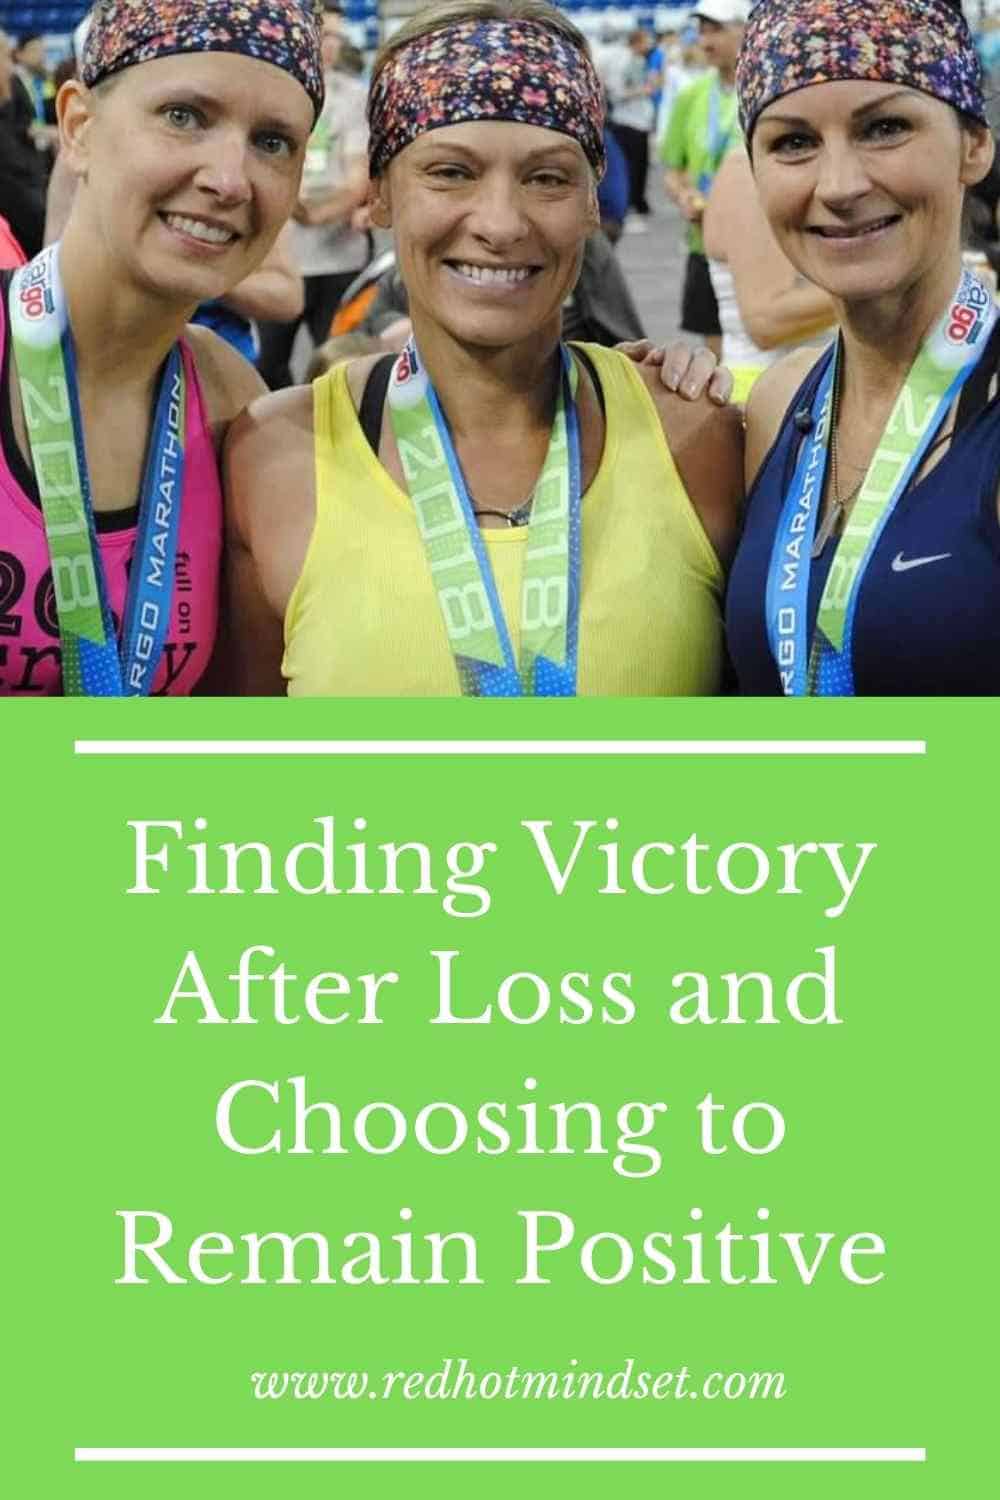 Finding Victory Over Loss and Choosing to Remain Positive